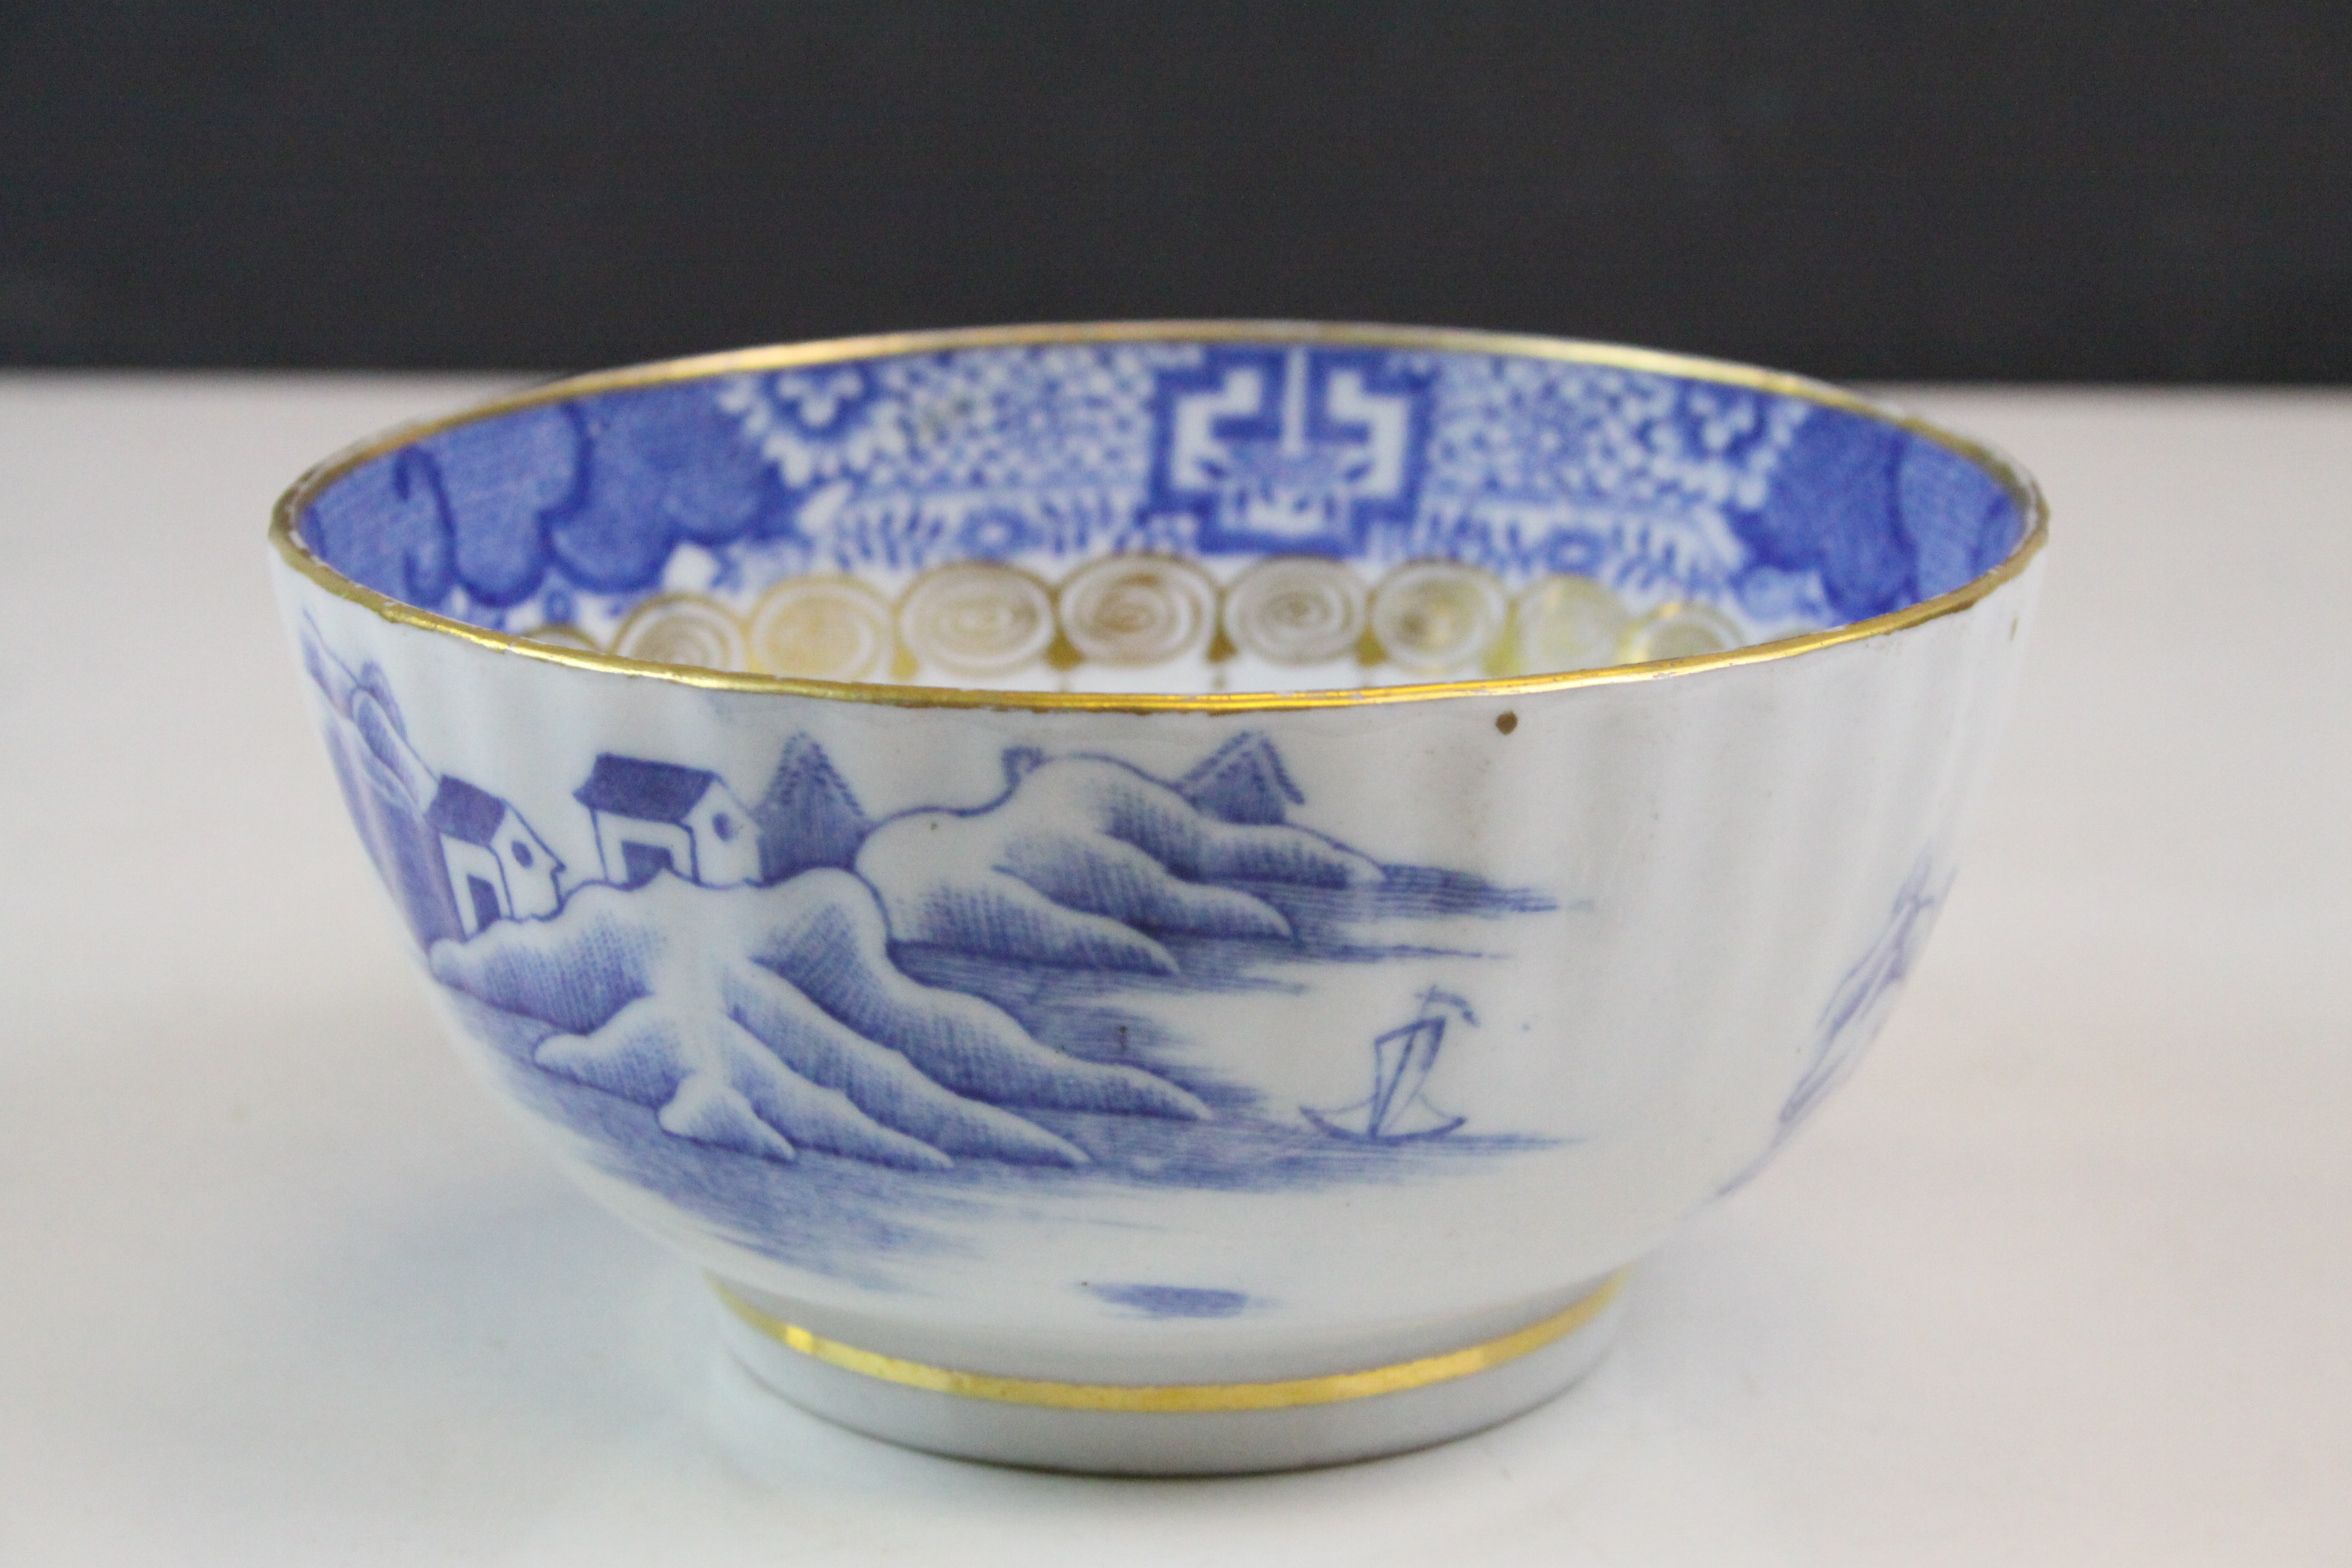 Oriental bowl with gold gilt rim and border in blue & white